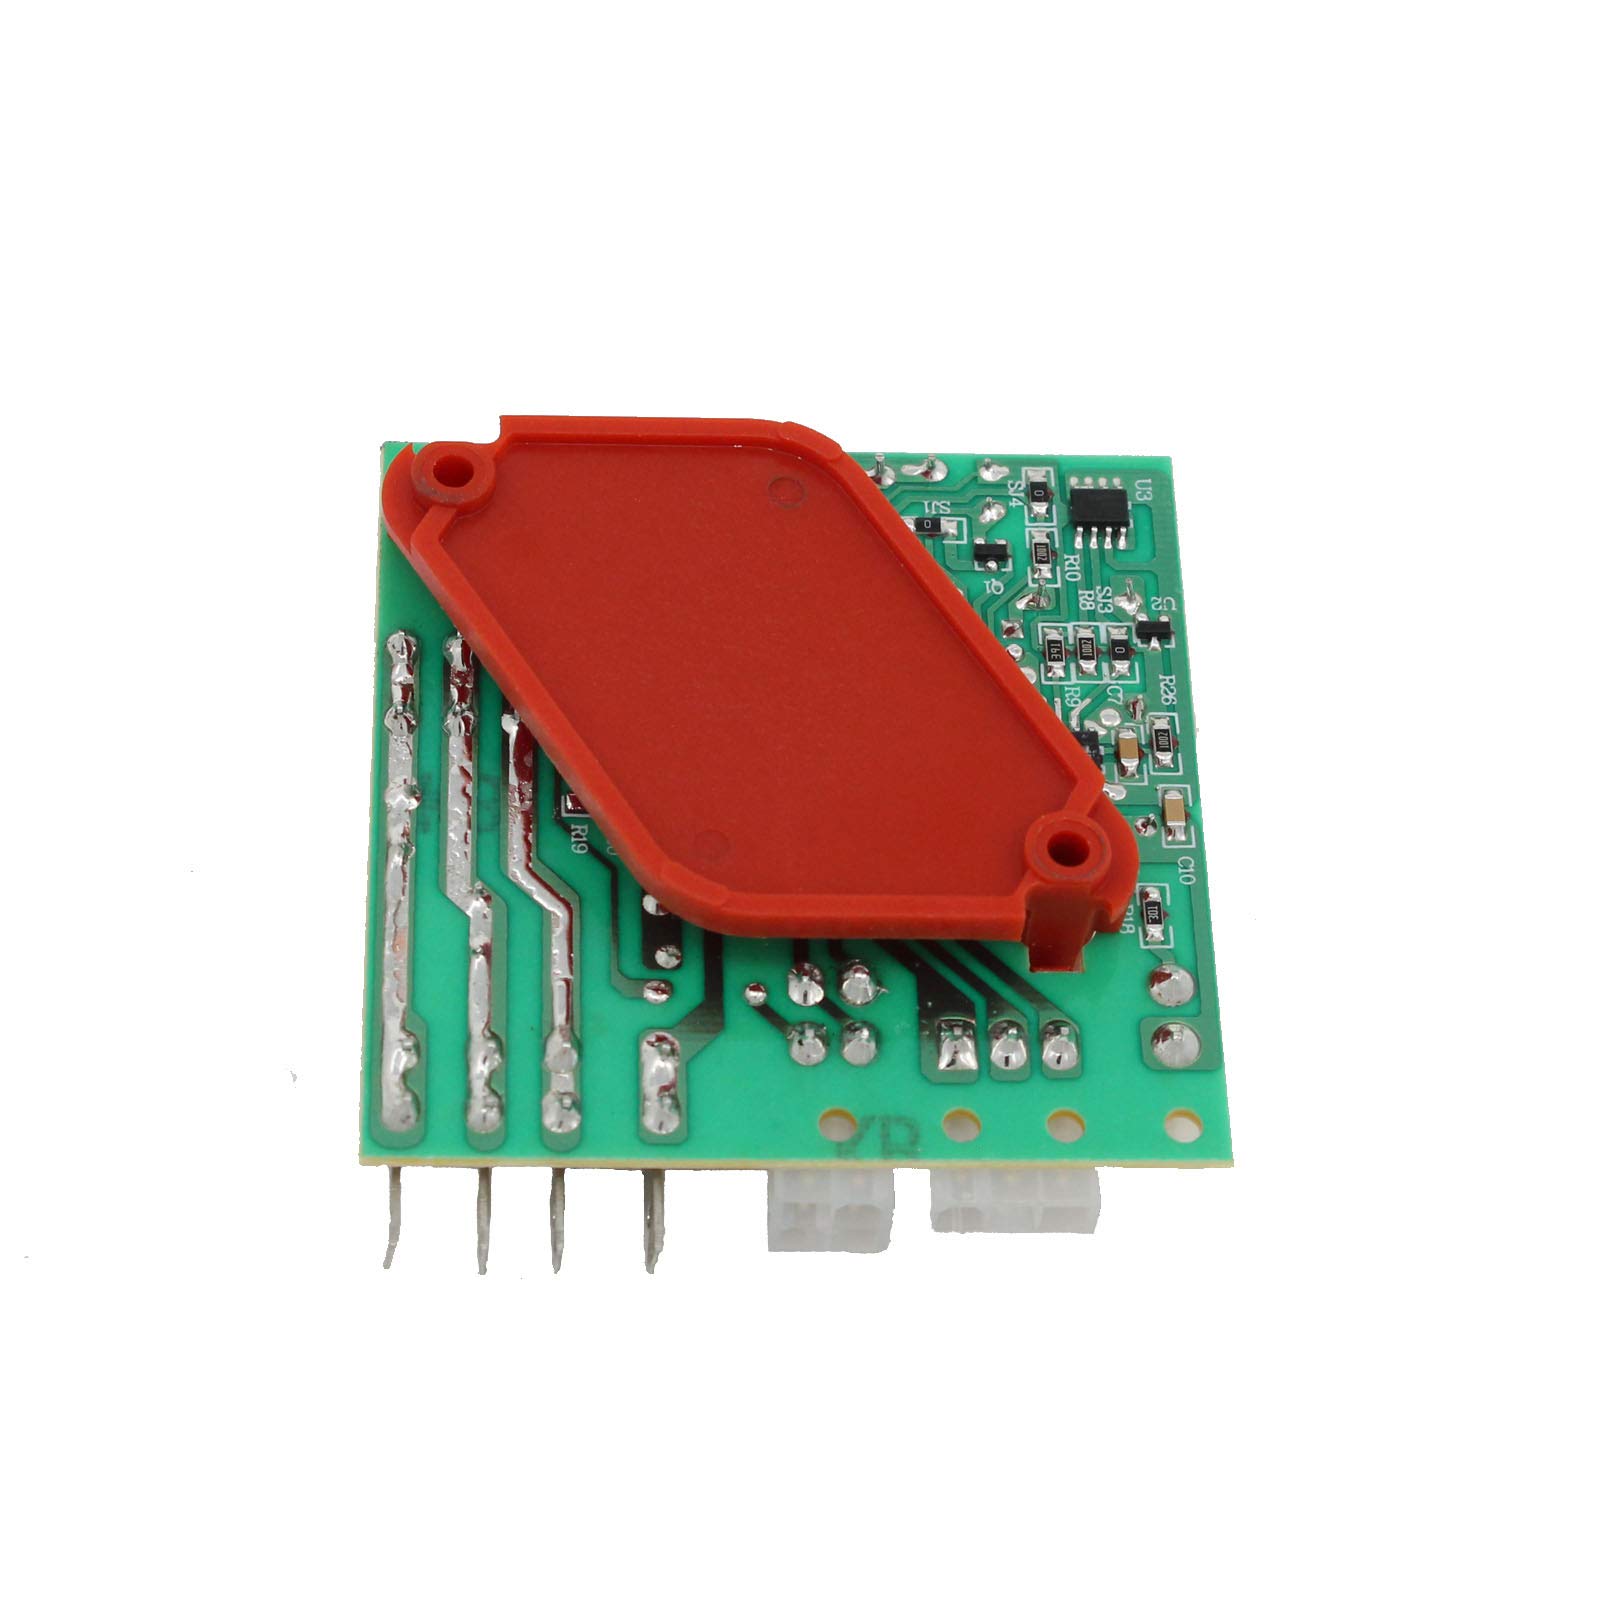 W10366605 Defrost Control Board Replacement for Whirlpool WRS325FDAM04 Refrigerator - Compatible with WPW10366605 Control Board - UpStart Components Brand